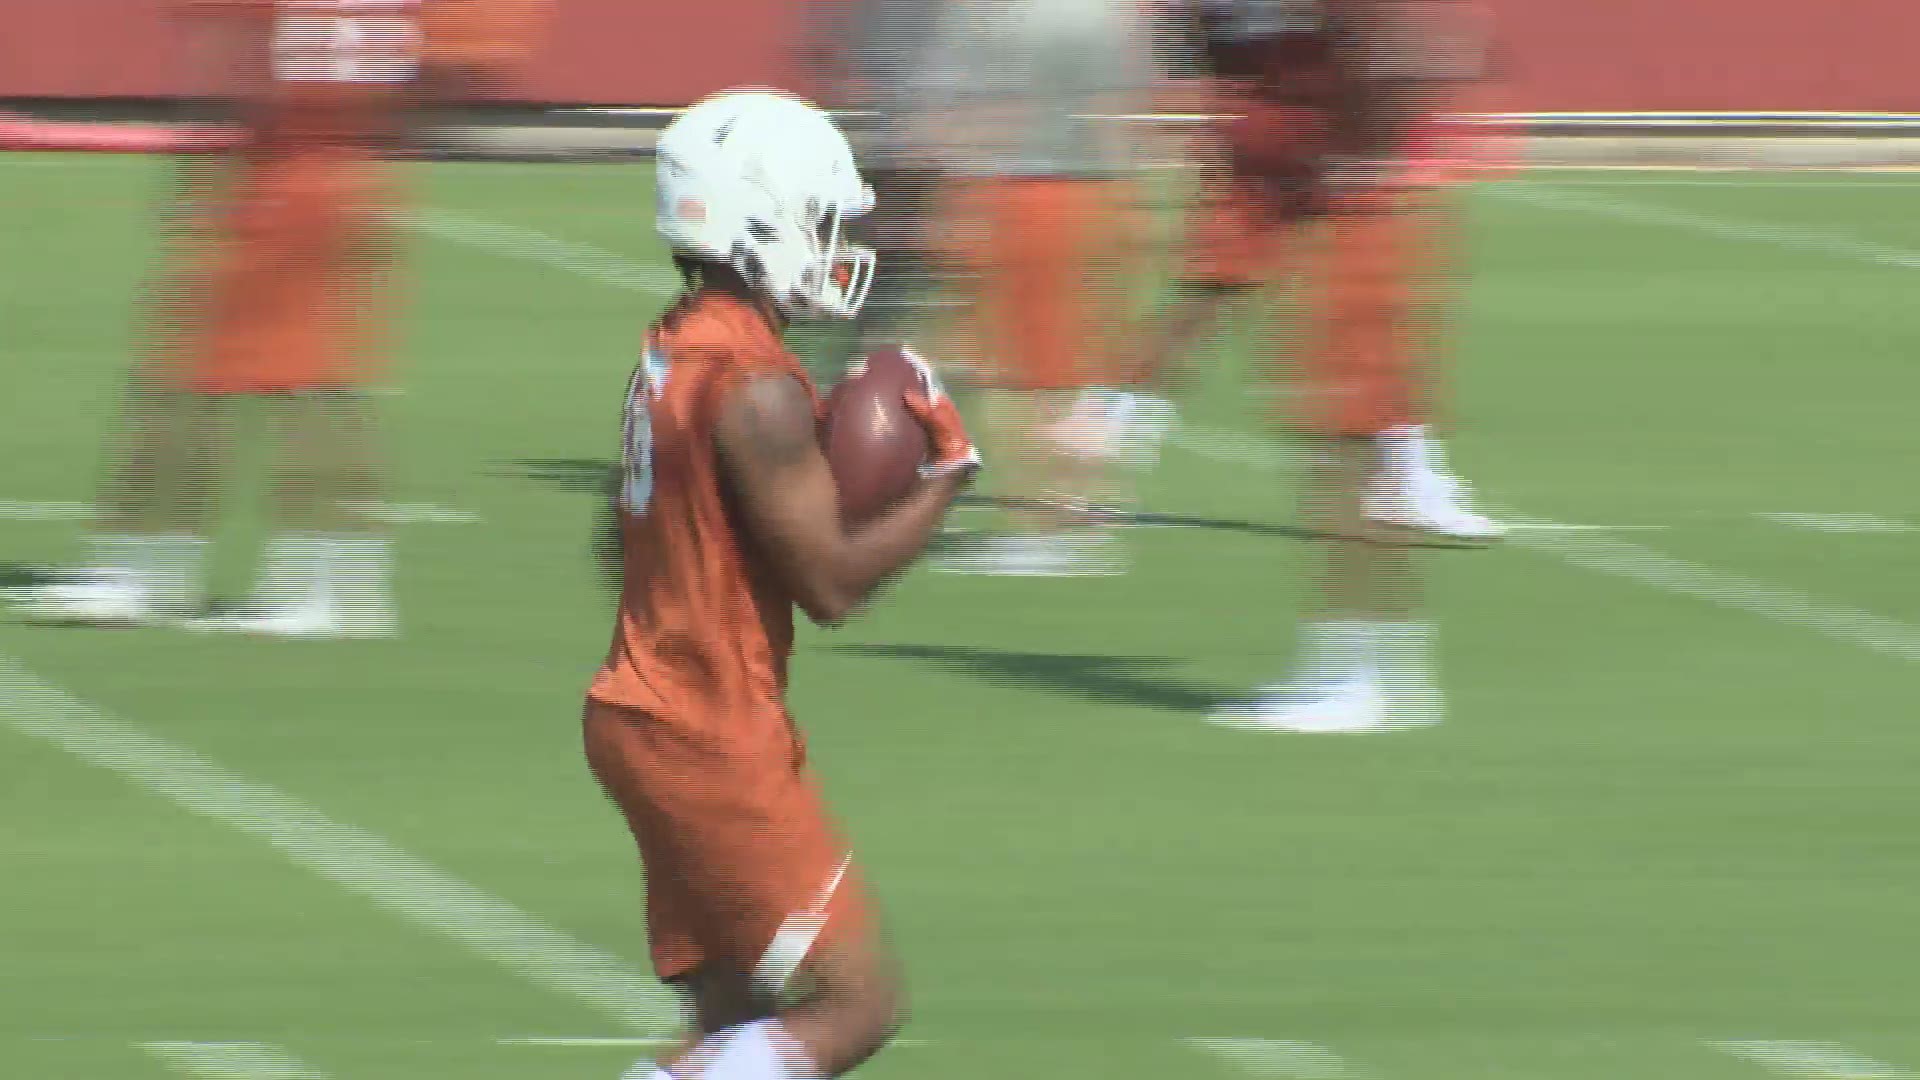 Longhorn sophomore receiver Davion Curtis says he is transferring.